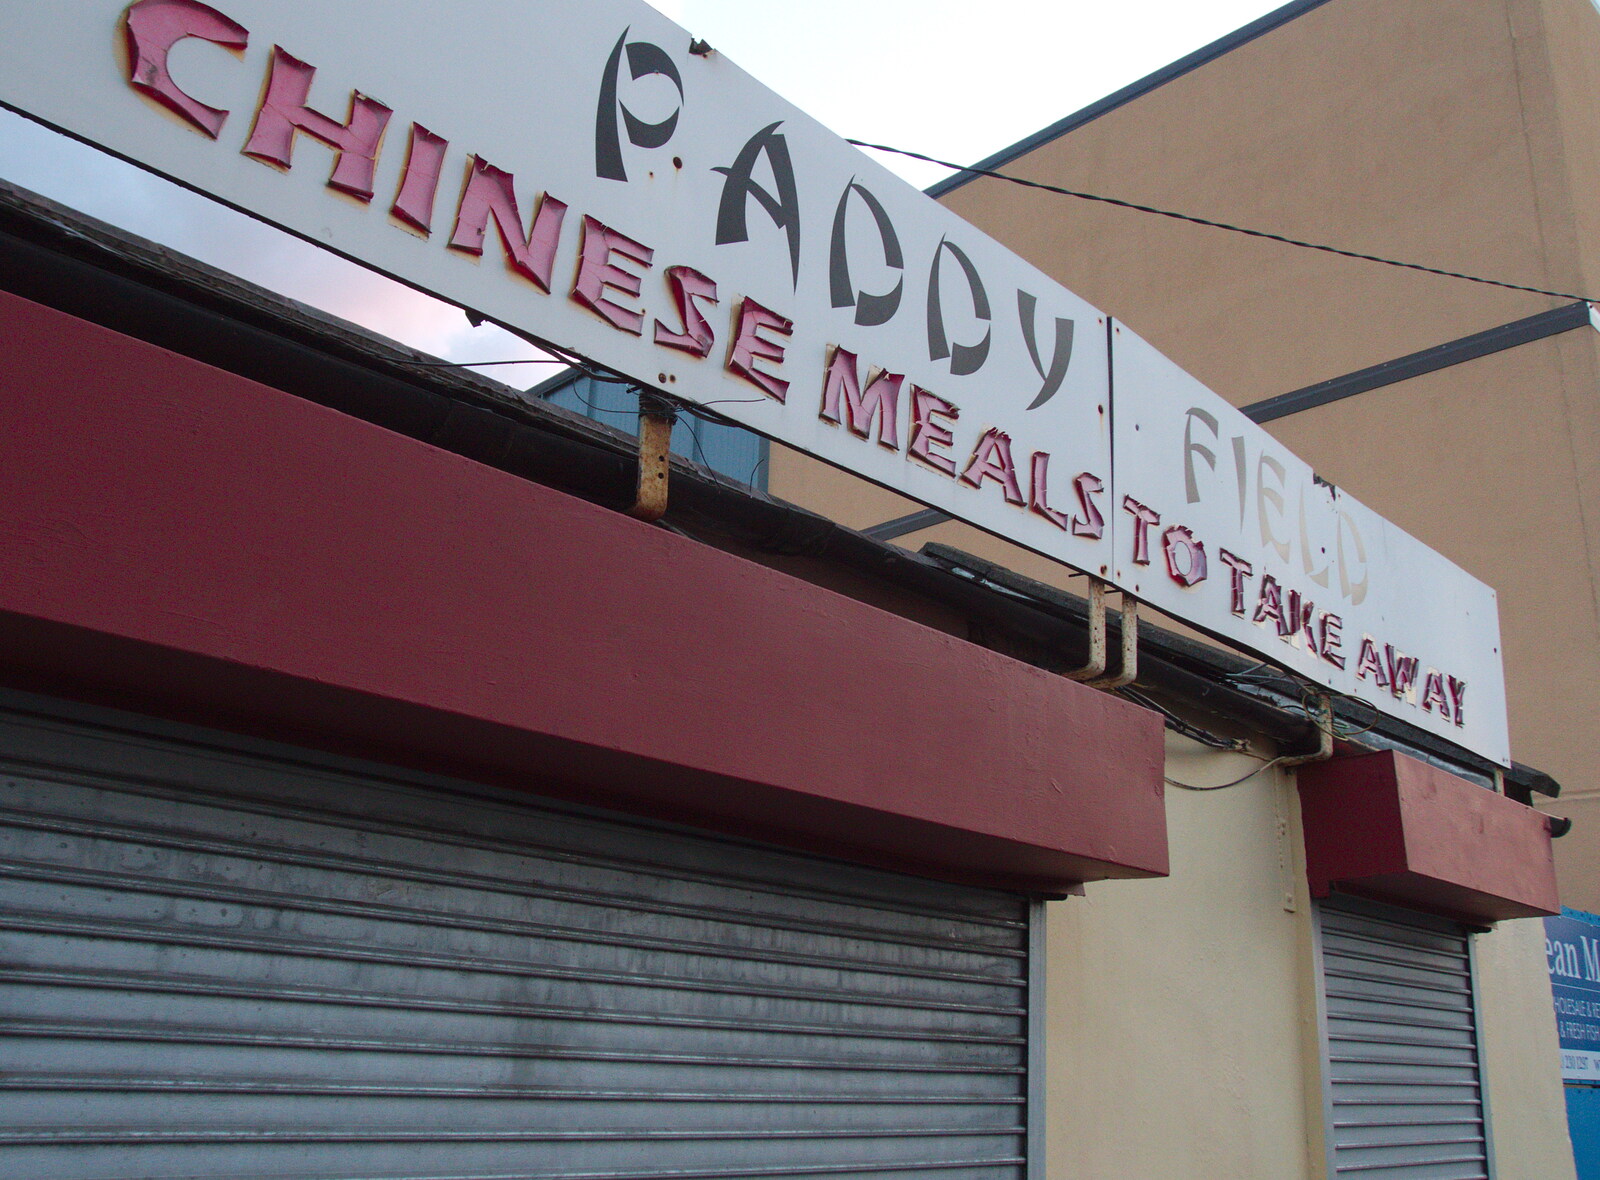 Cross-cultural take-away naming at Paddy Field  from Jimmy and Catherina's, Ballsbridge, Dublin - 10th August 2019